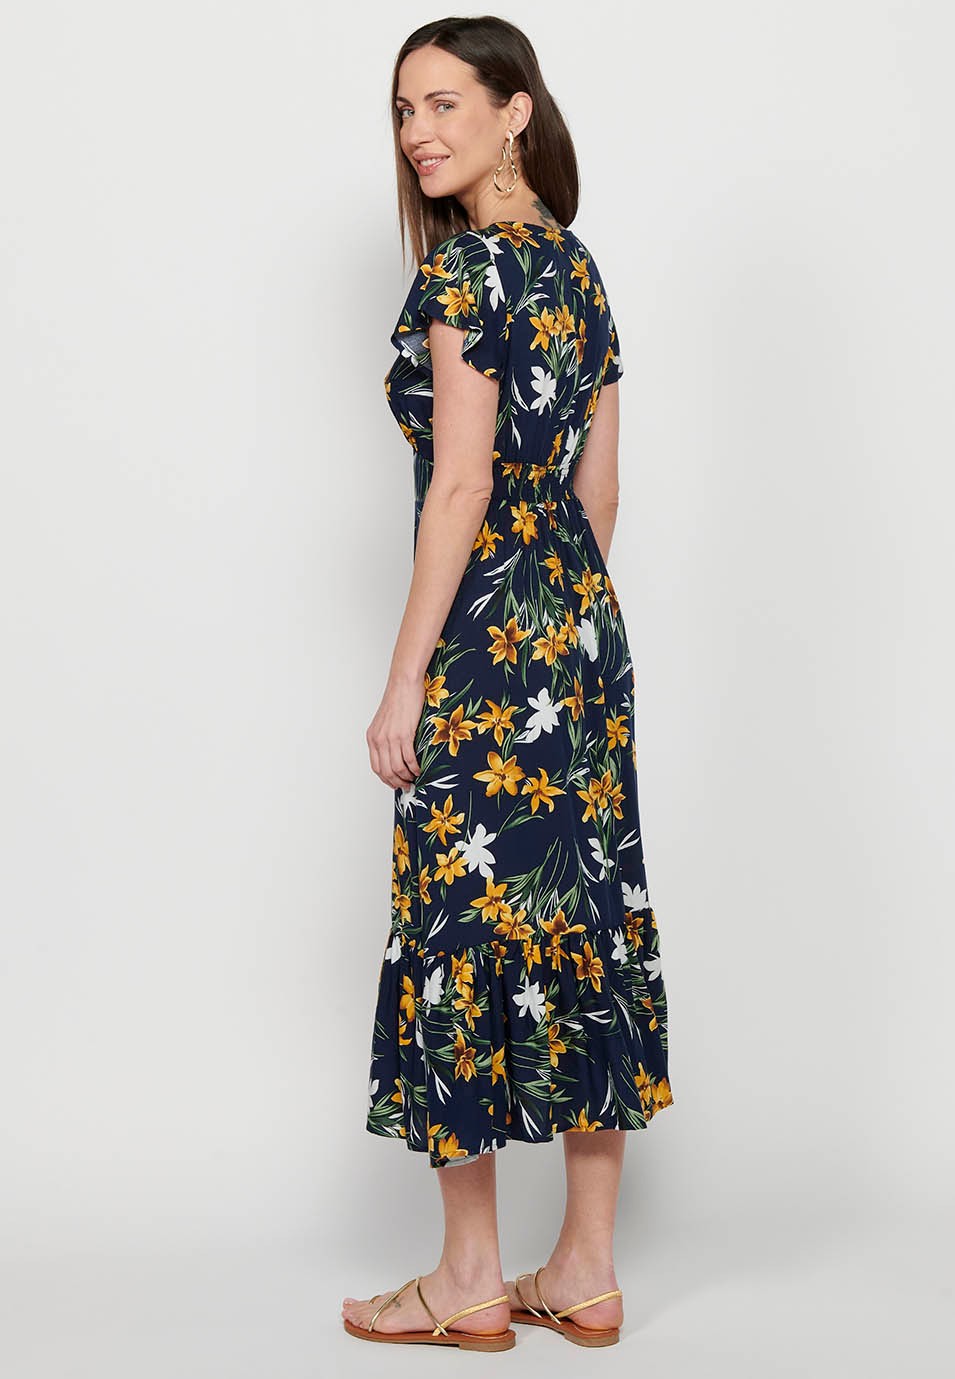 Long short-sleeved dress with V-neck and floral print in Navy for Women 4